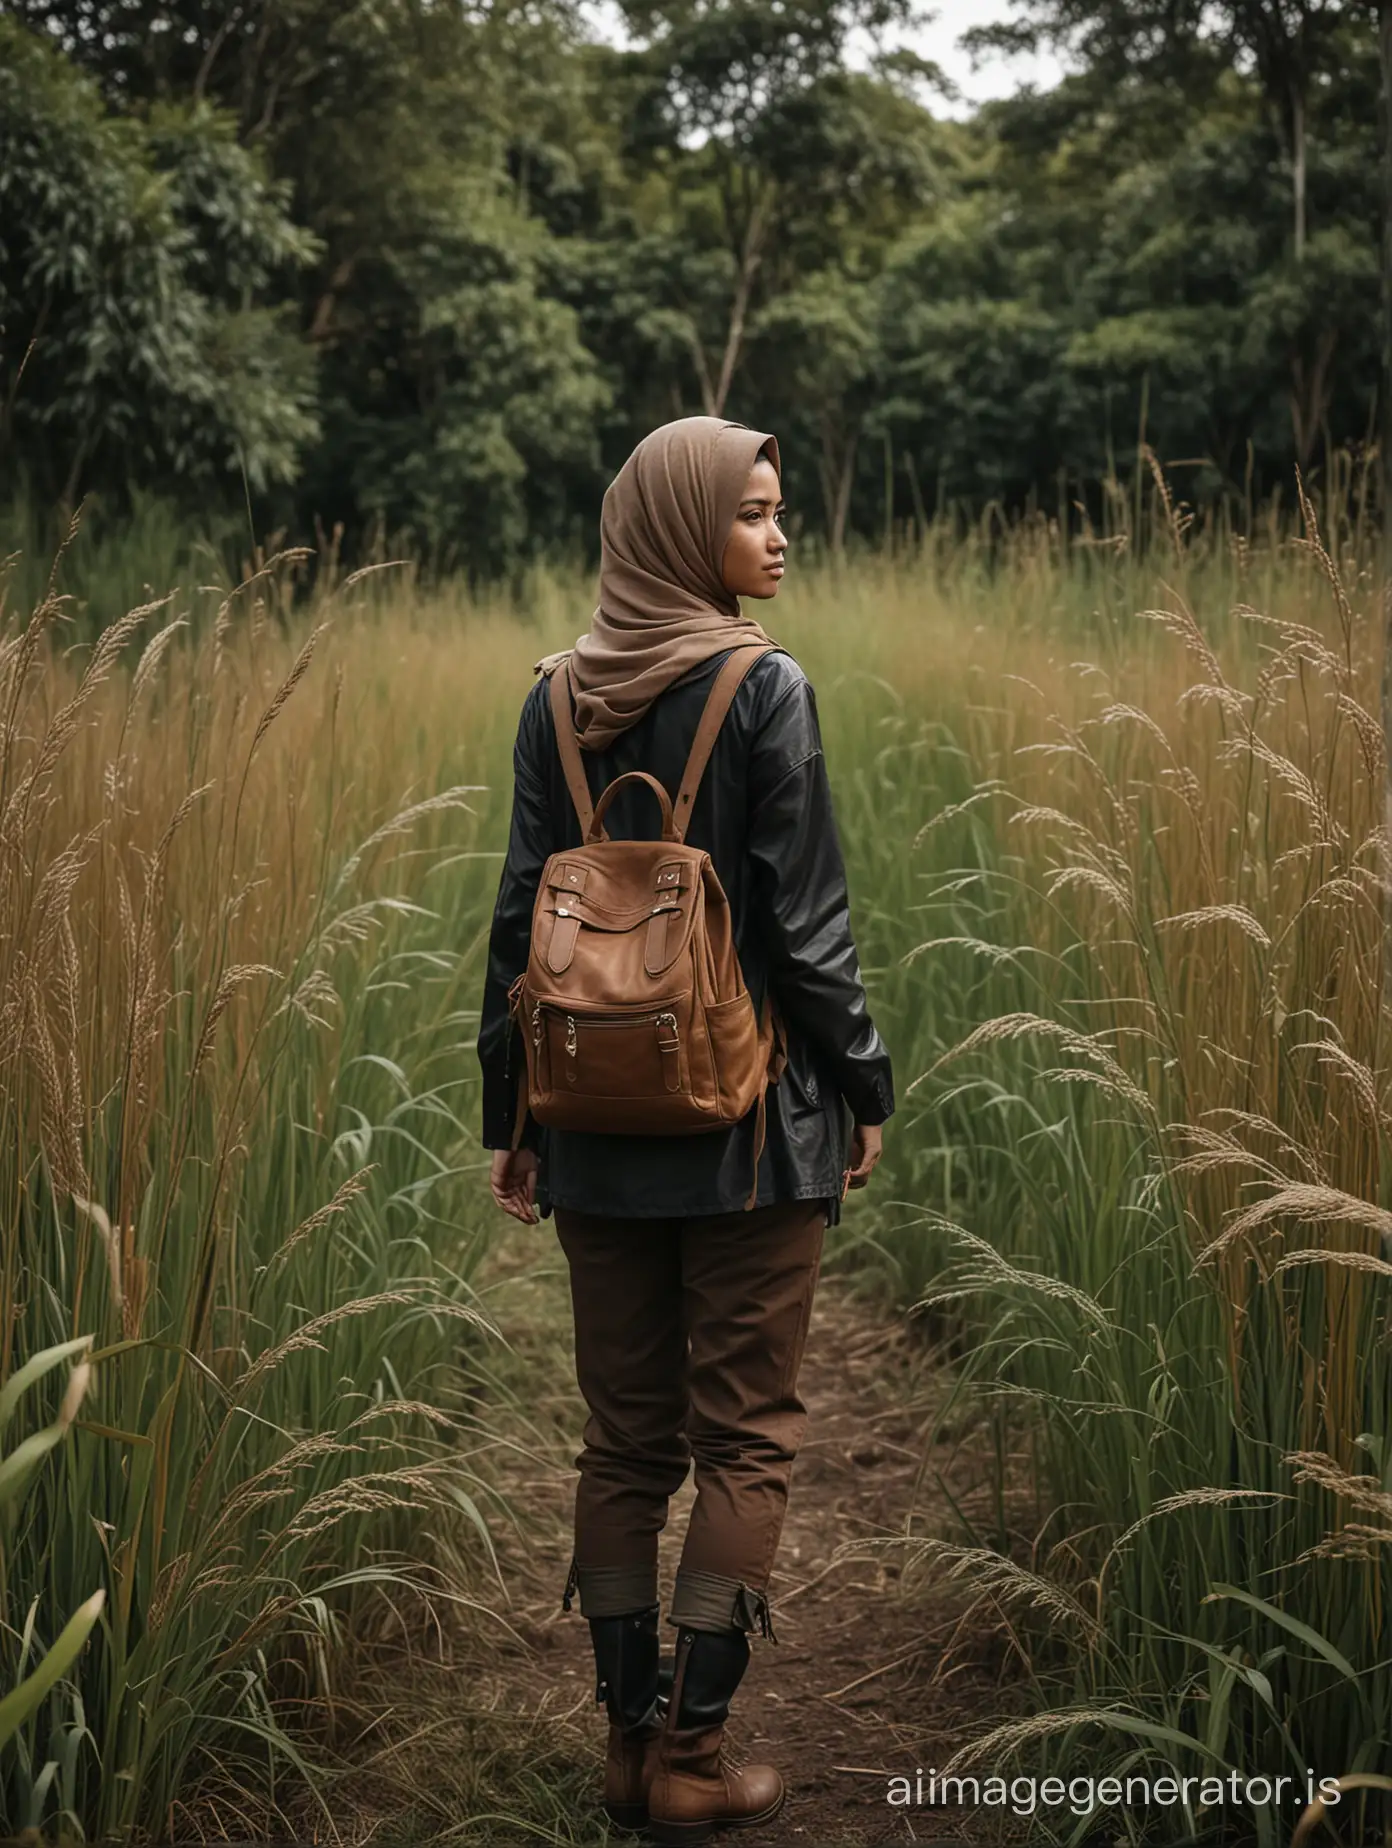 full body, back view, cinematic portrait of a 30 year Indonesian woman stands in the middle of tall grass, surrounded by lush trees, wearing a hijab, dark colored jacket and trousers and boots, while carrying a brown backpack, looking at the camera, flat face